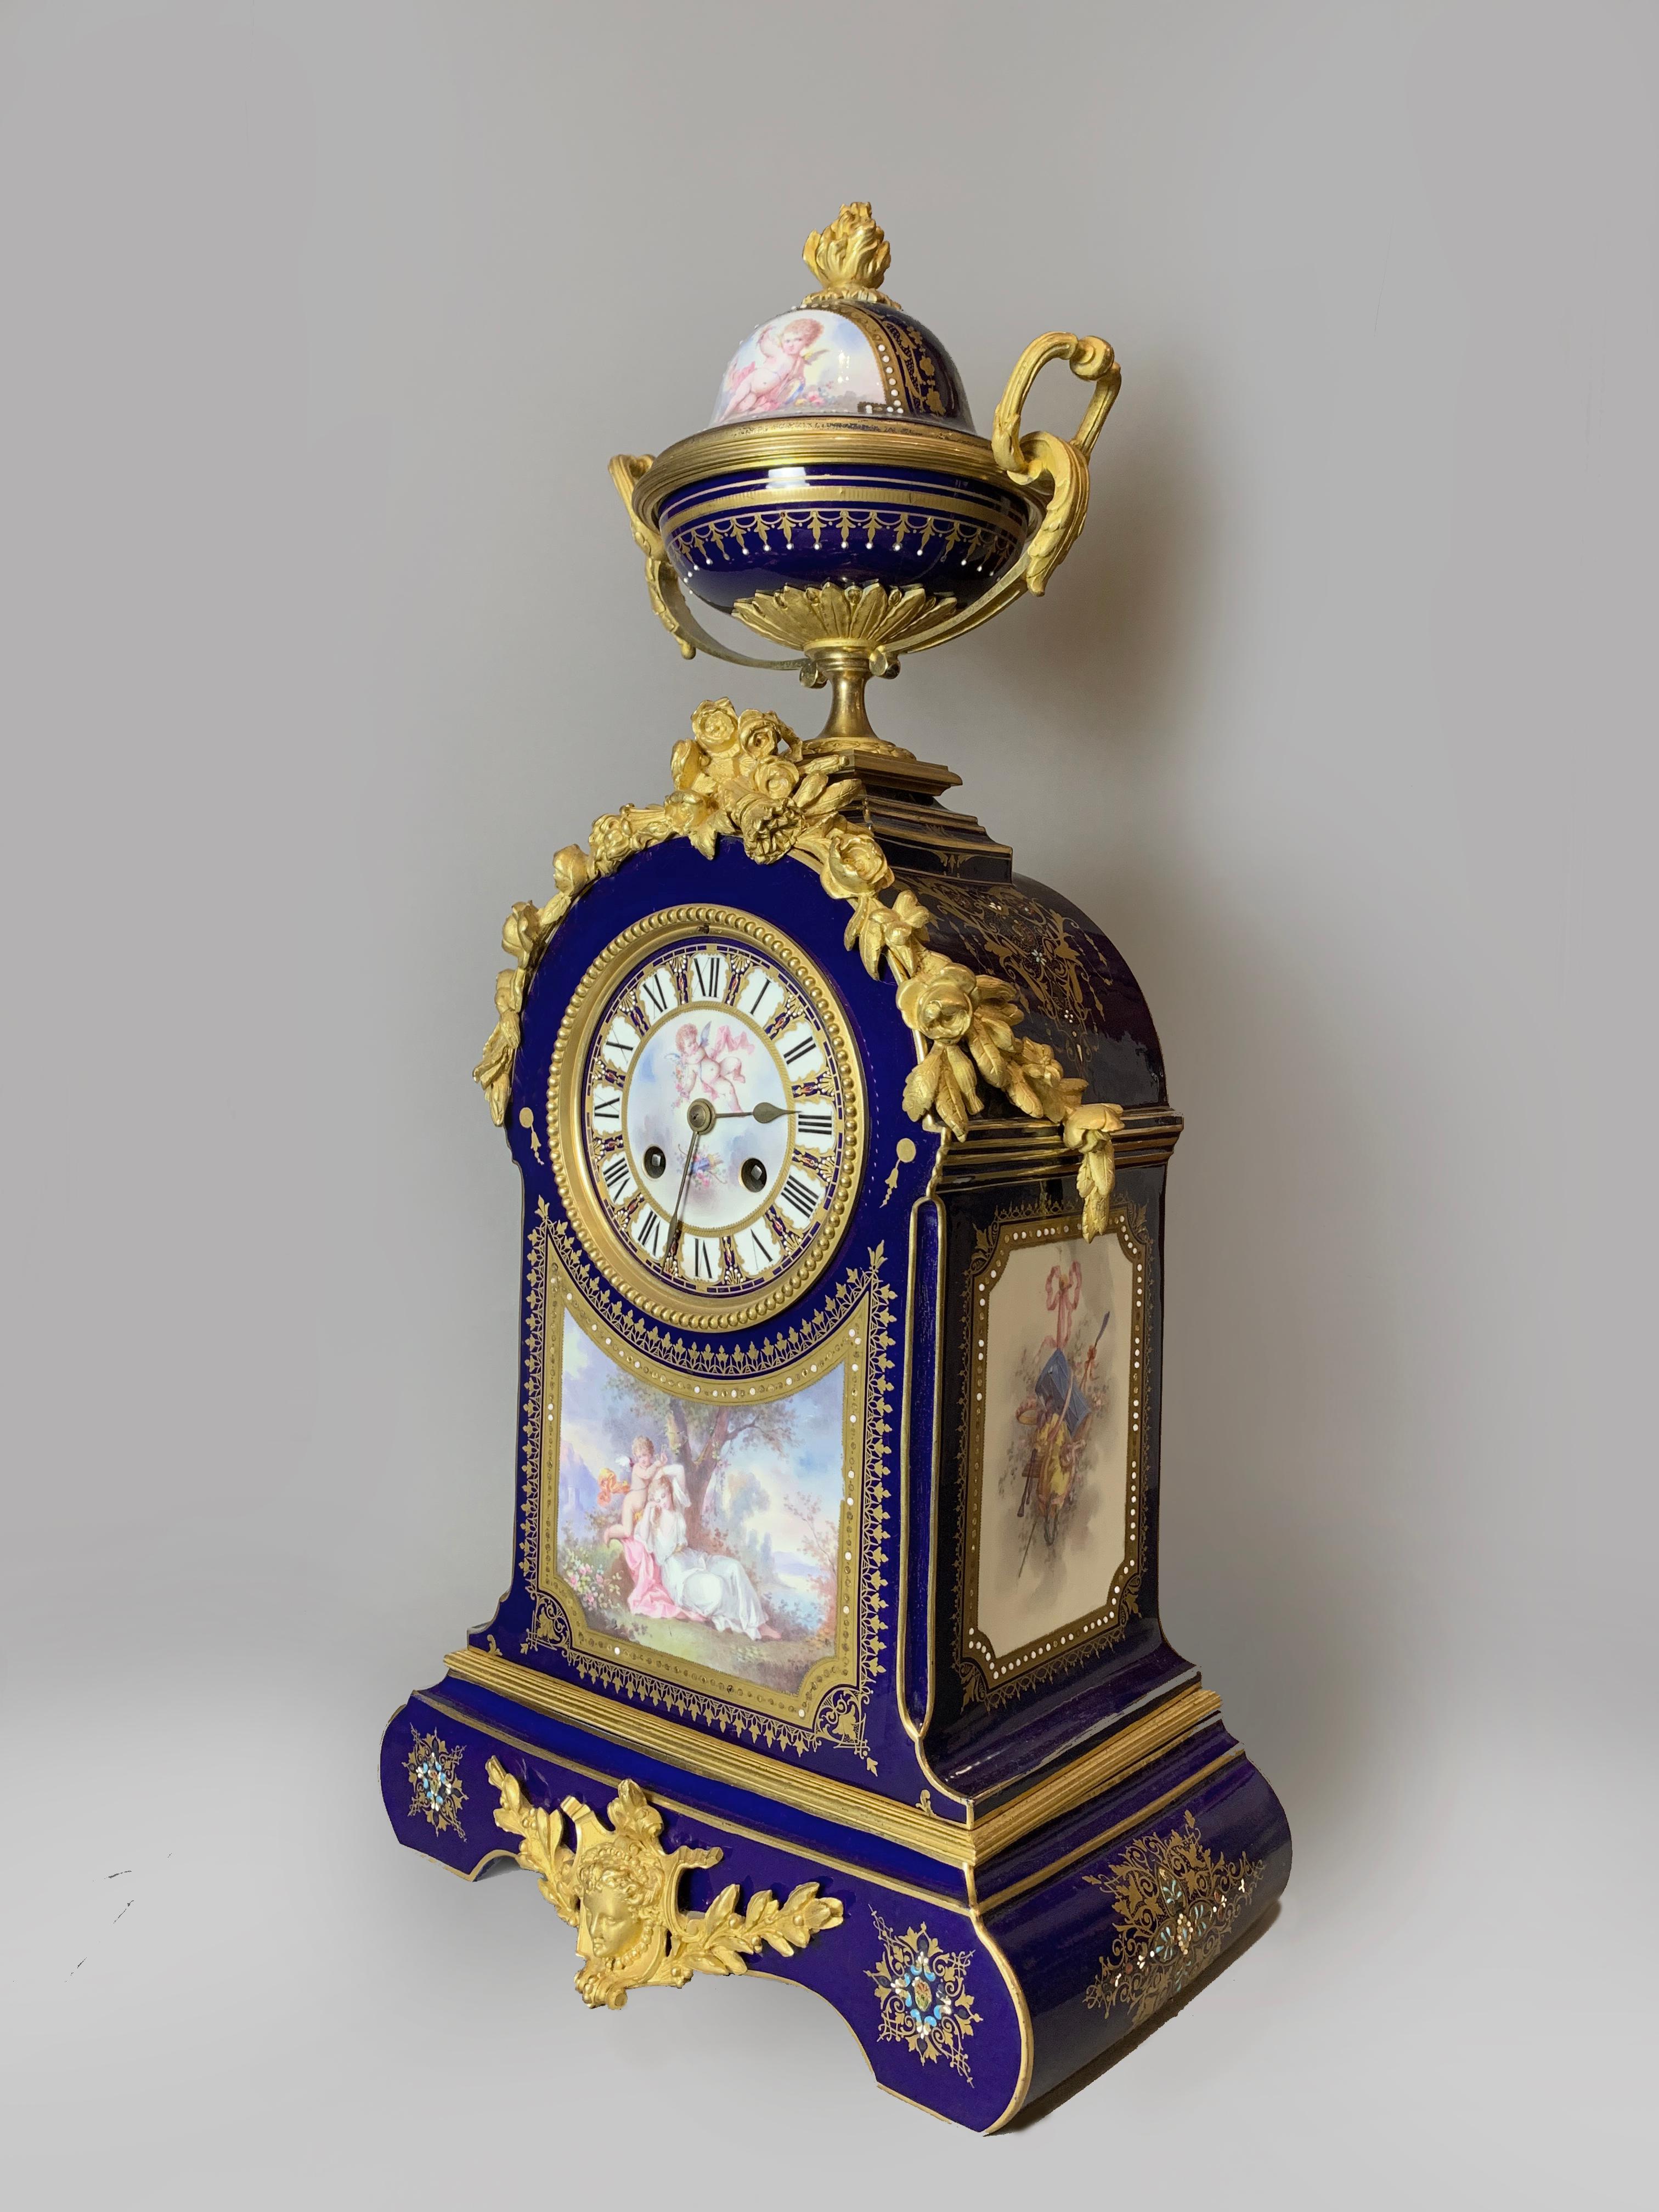 An ornate gilt bronze-mounted Sèvres-style blue ground mantel clock. 

French, circa 1880.

An ornate gilt bronze-mounted Sèvres-style blue ground mantel clock, the shaped rectangular case painted with Venus and Cupid in a 'jewelled' gilt panel